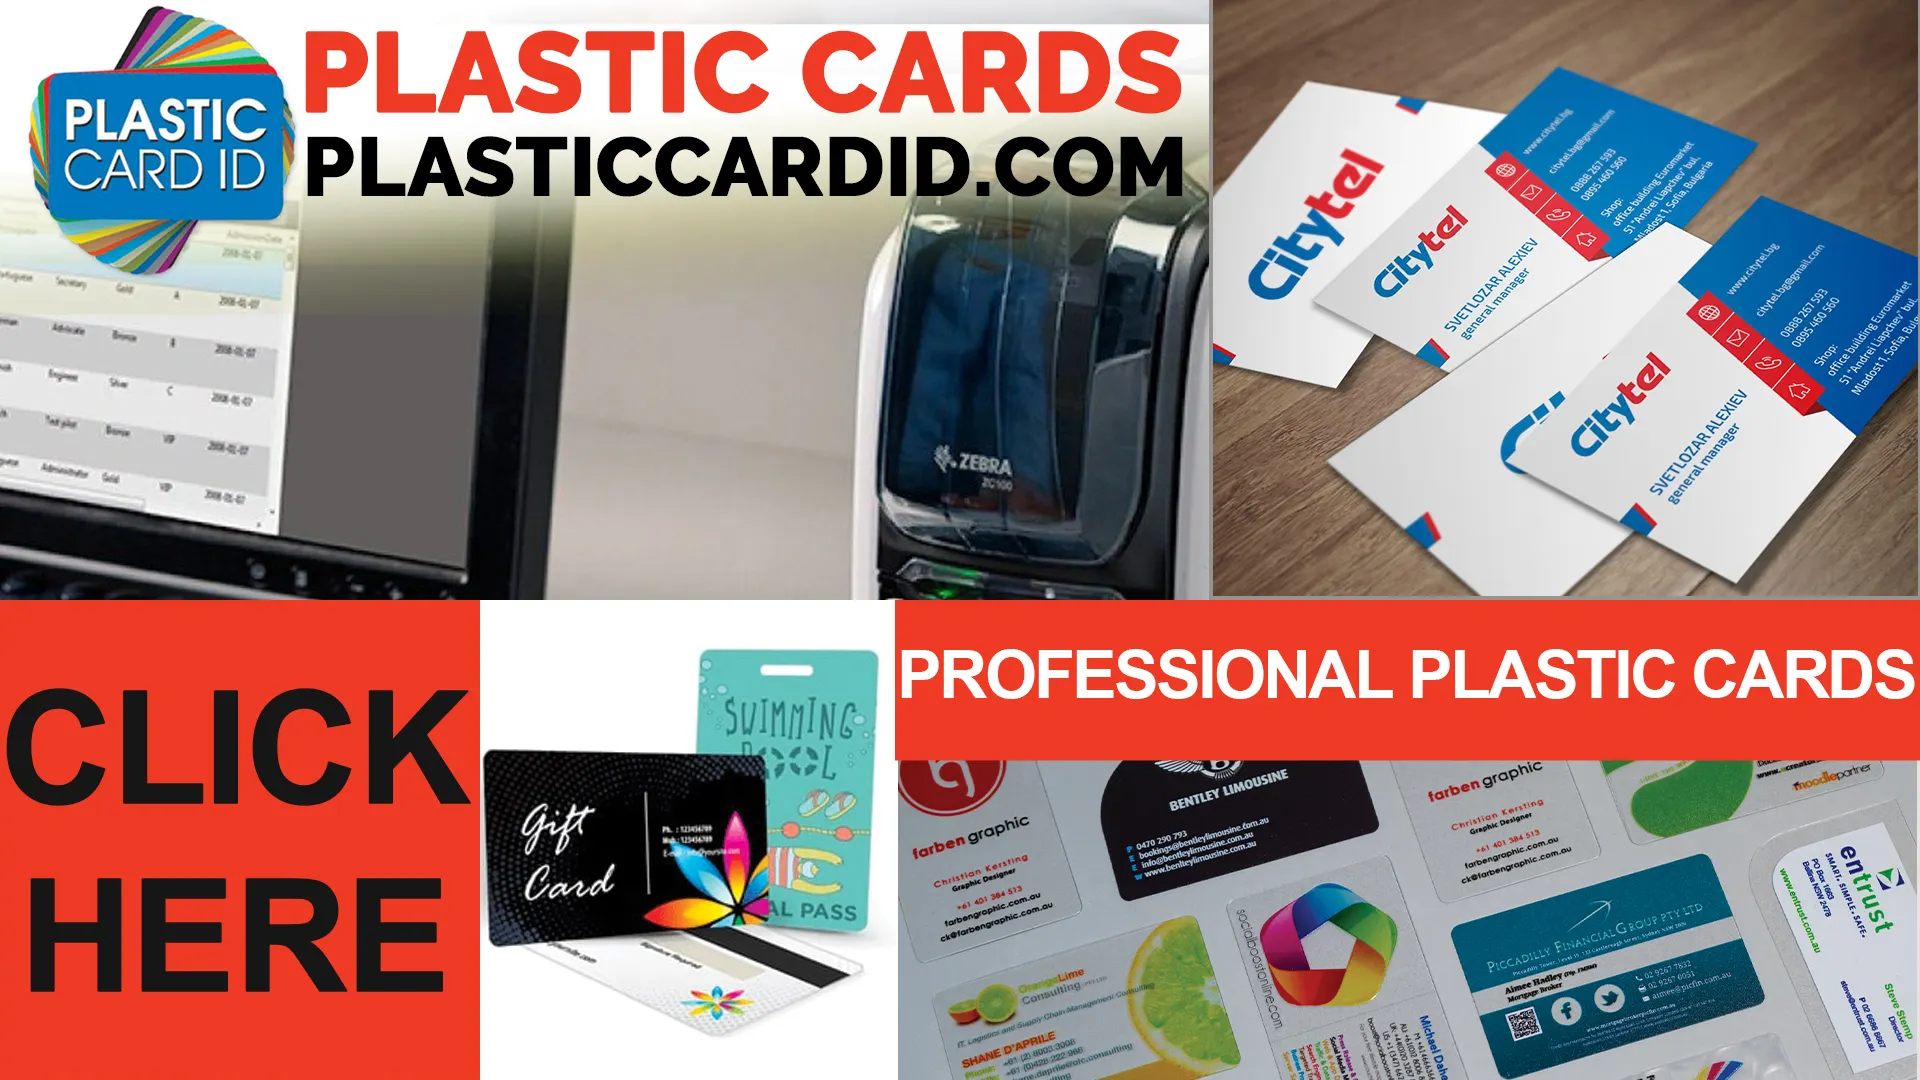 Plastic Card ID
: Experts in Access Control Solutions